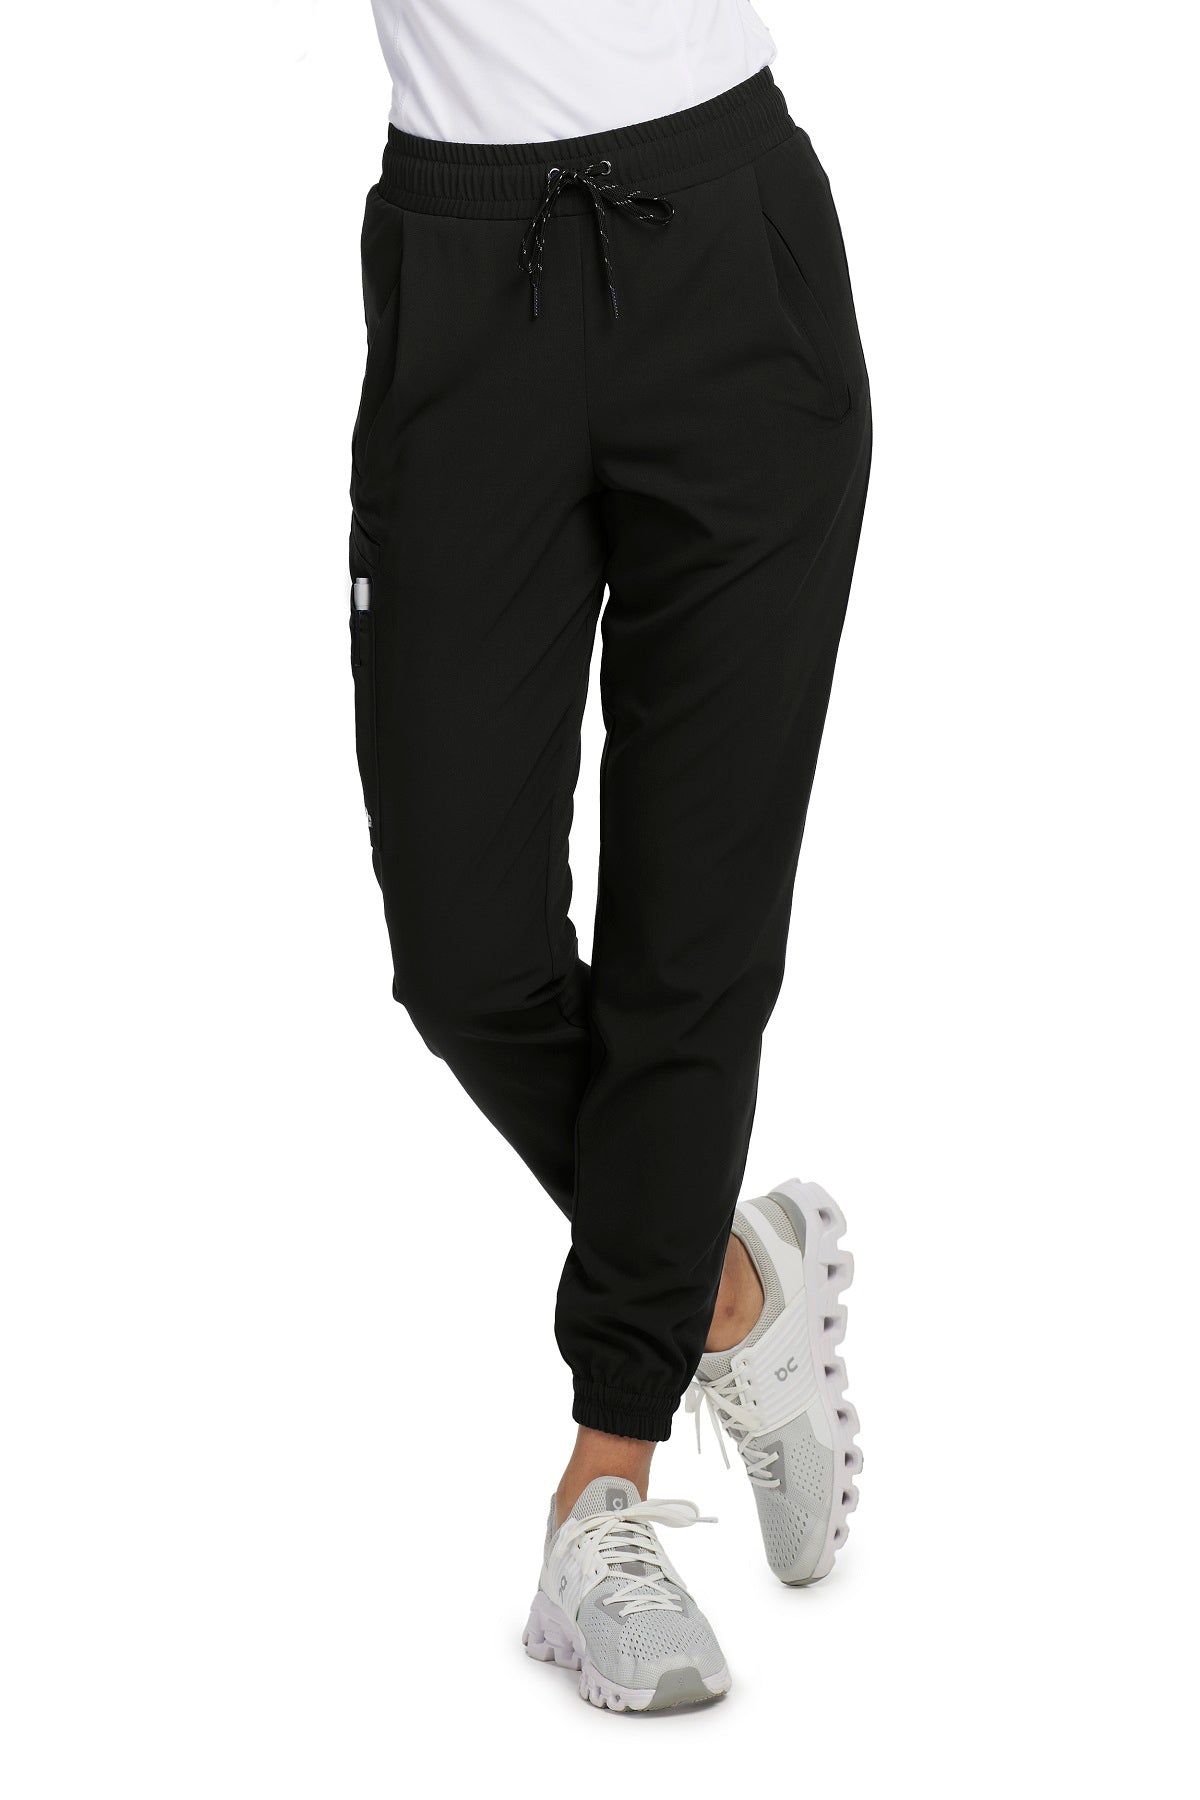 Barco Unify Scrub Pants Mission Jogger Petite Length in Black at Parker's Clothing and Shoes.